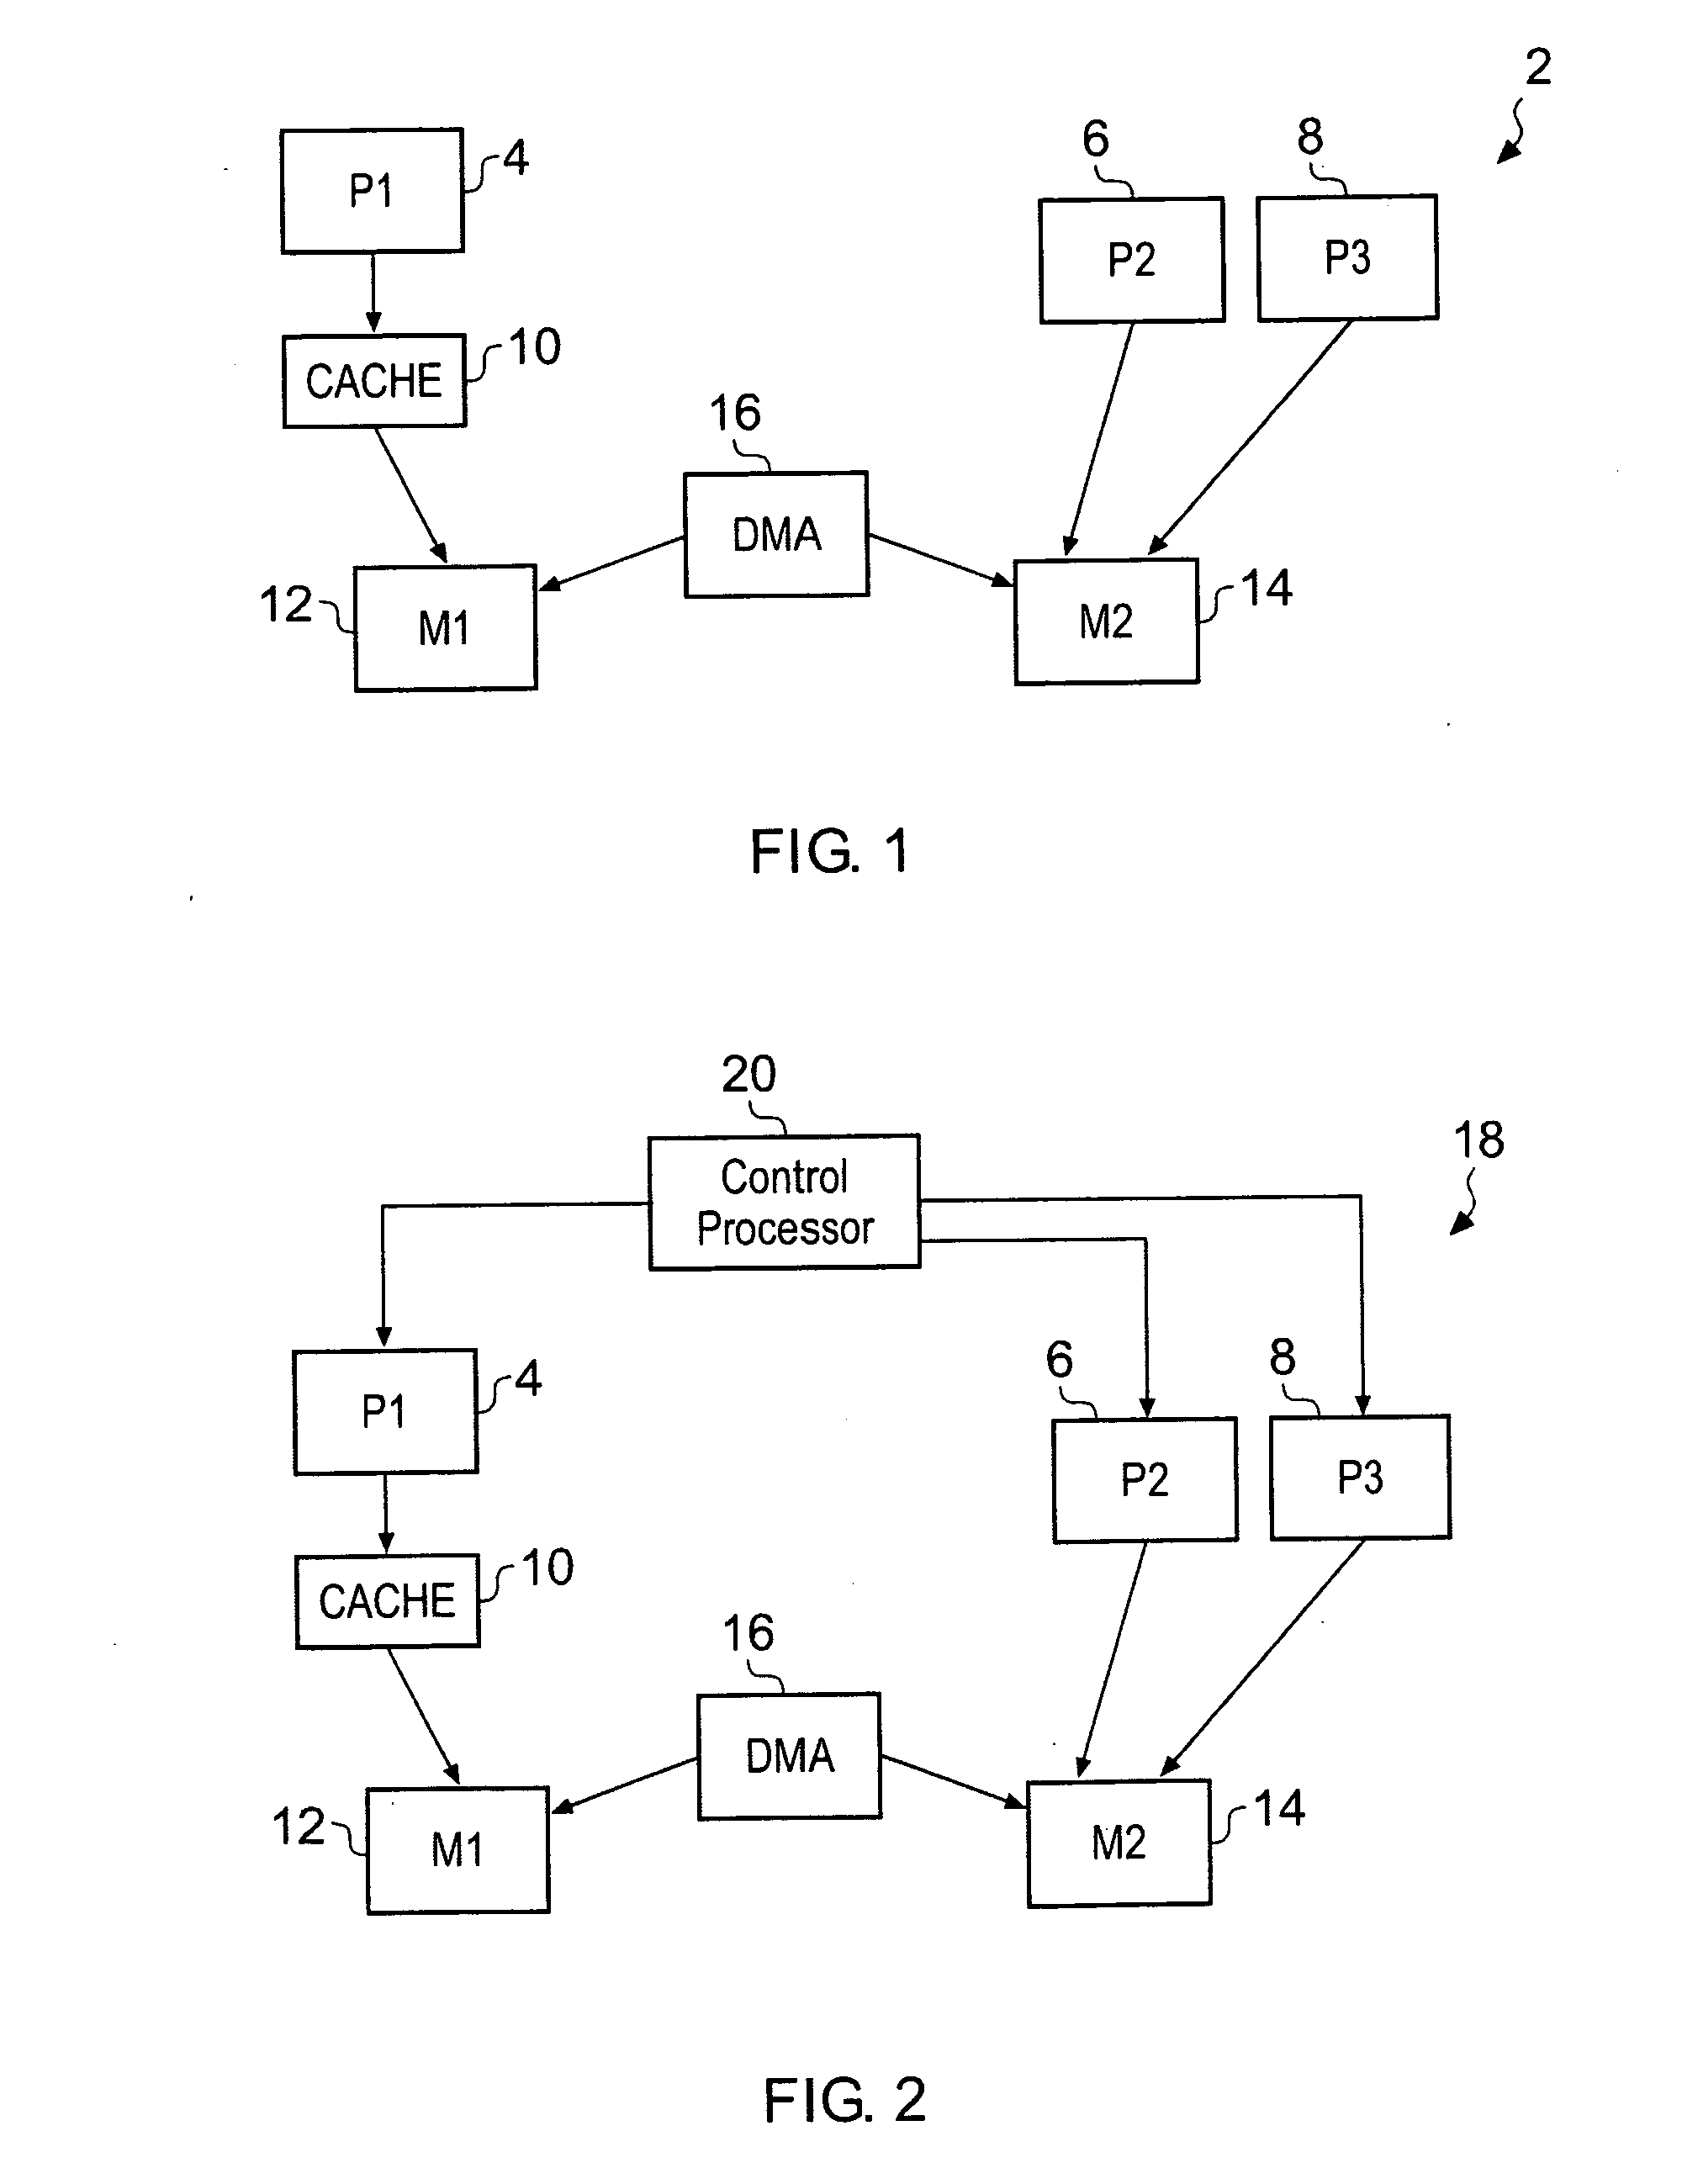 Mapping a computer program to an asymmetric multiprocessing apparatus